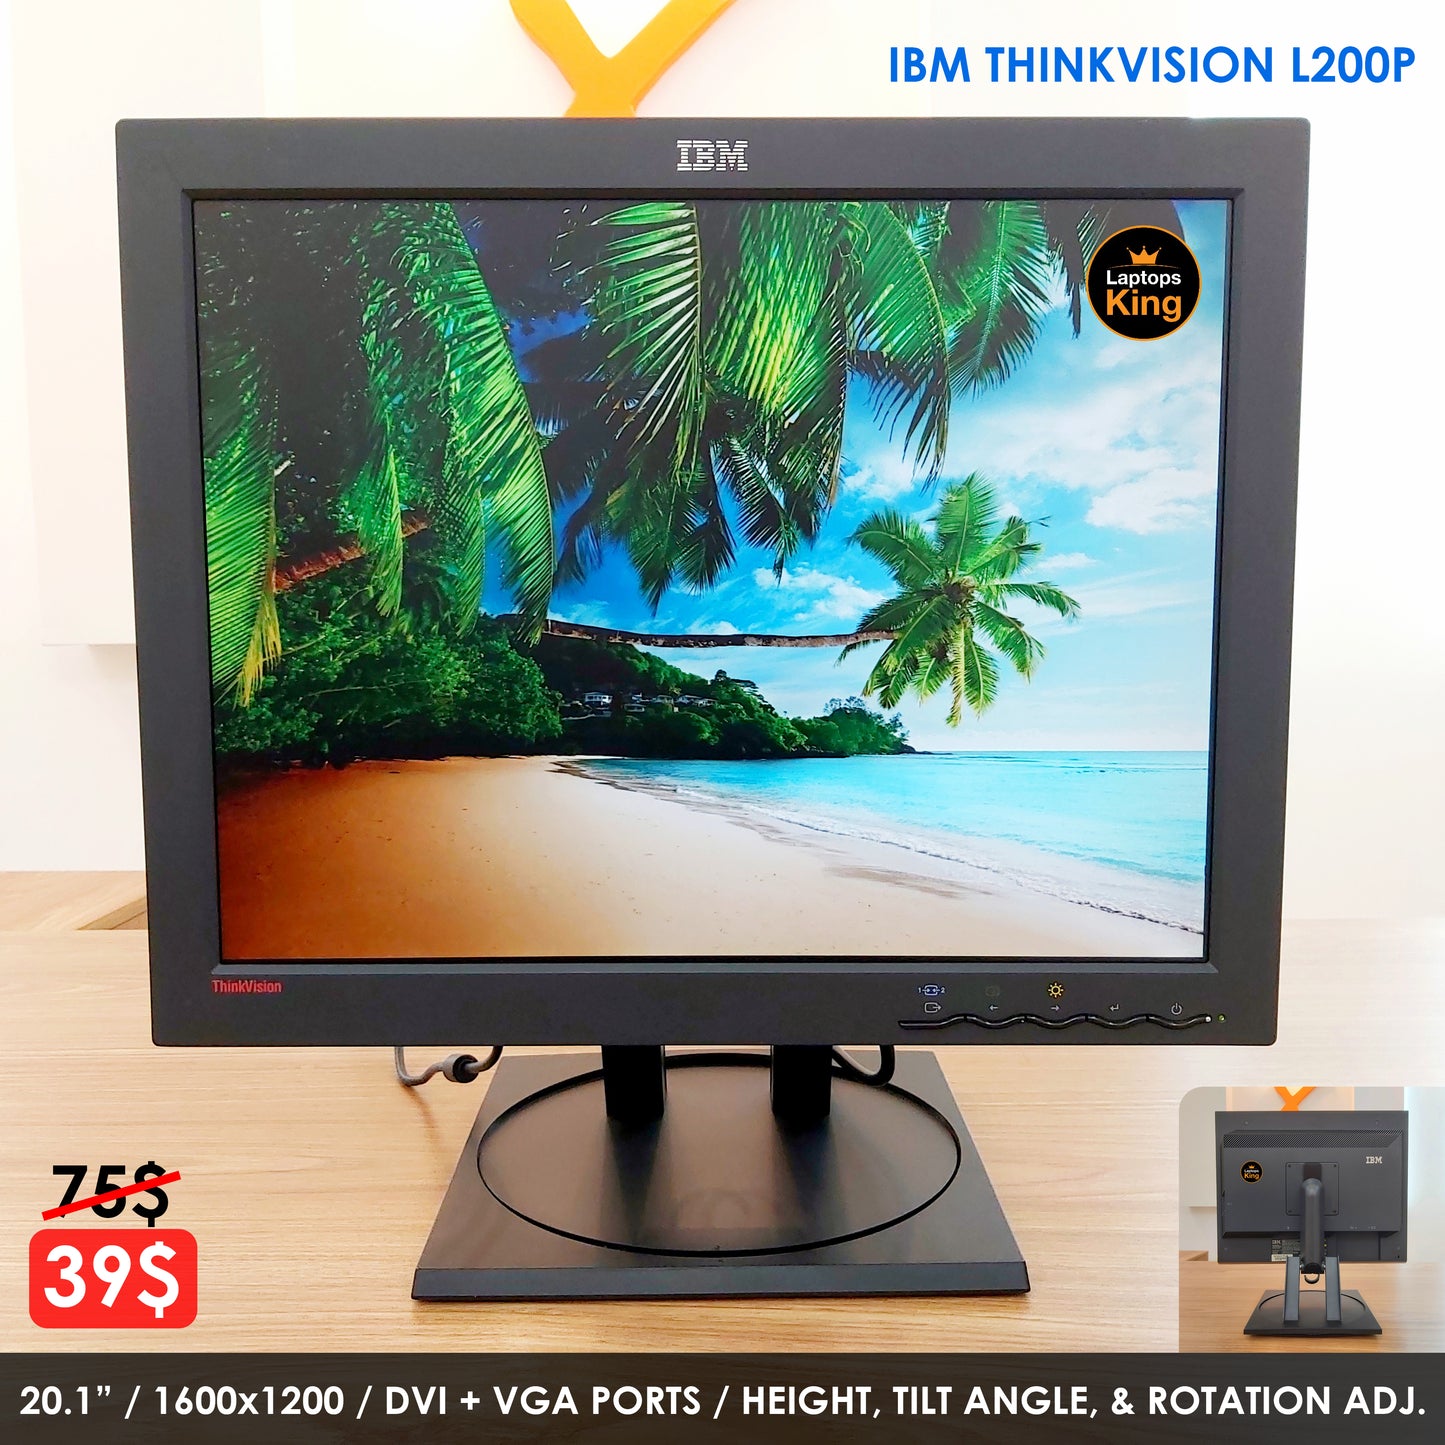 IBM ThinkVision L200p 20.1" Monitor (Used Very Clean)